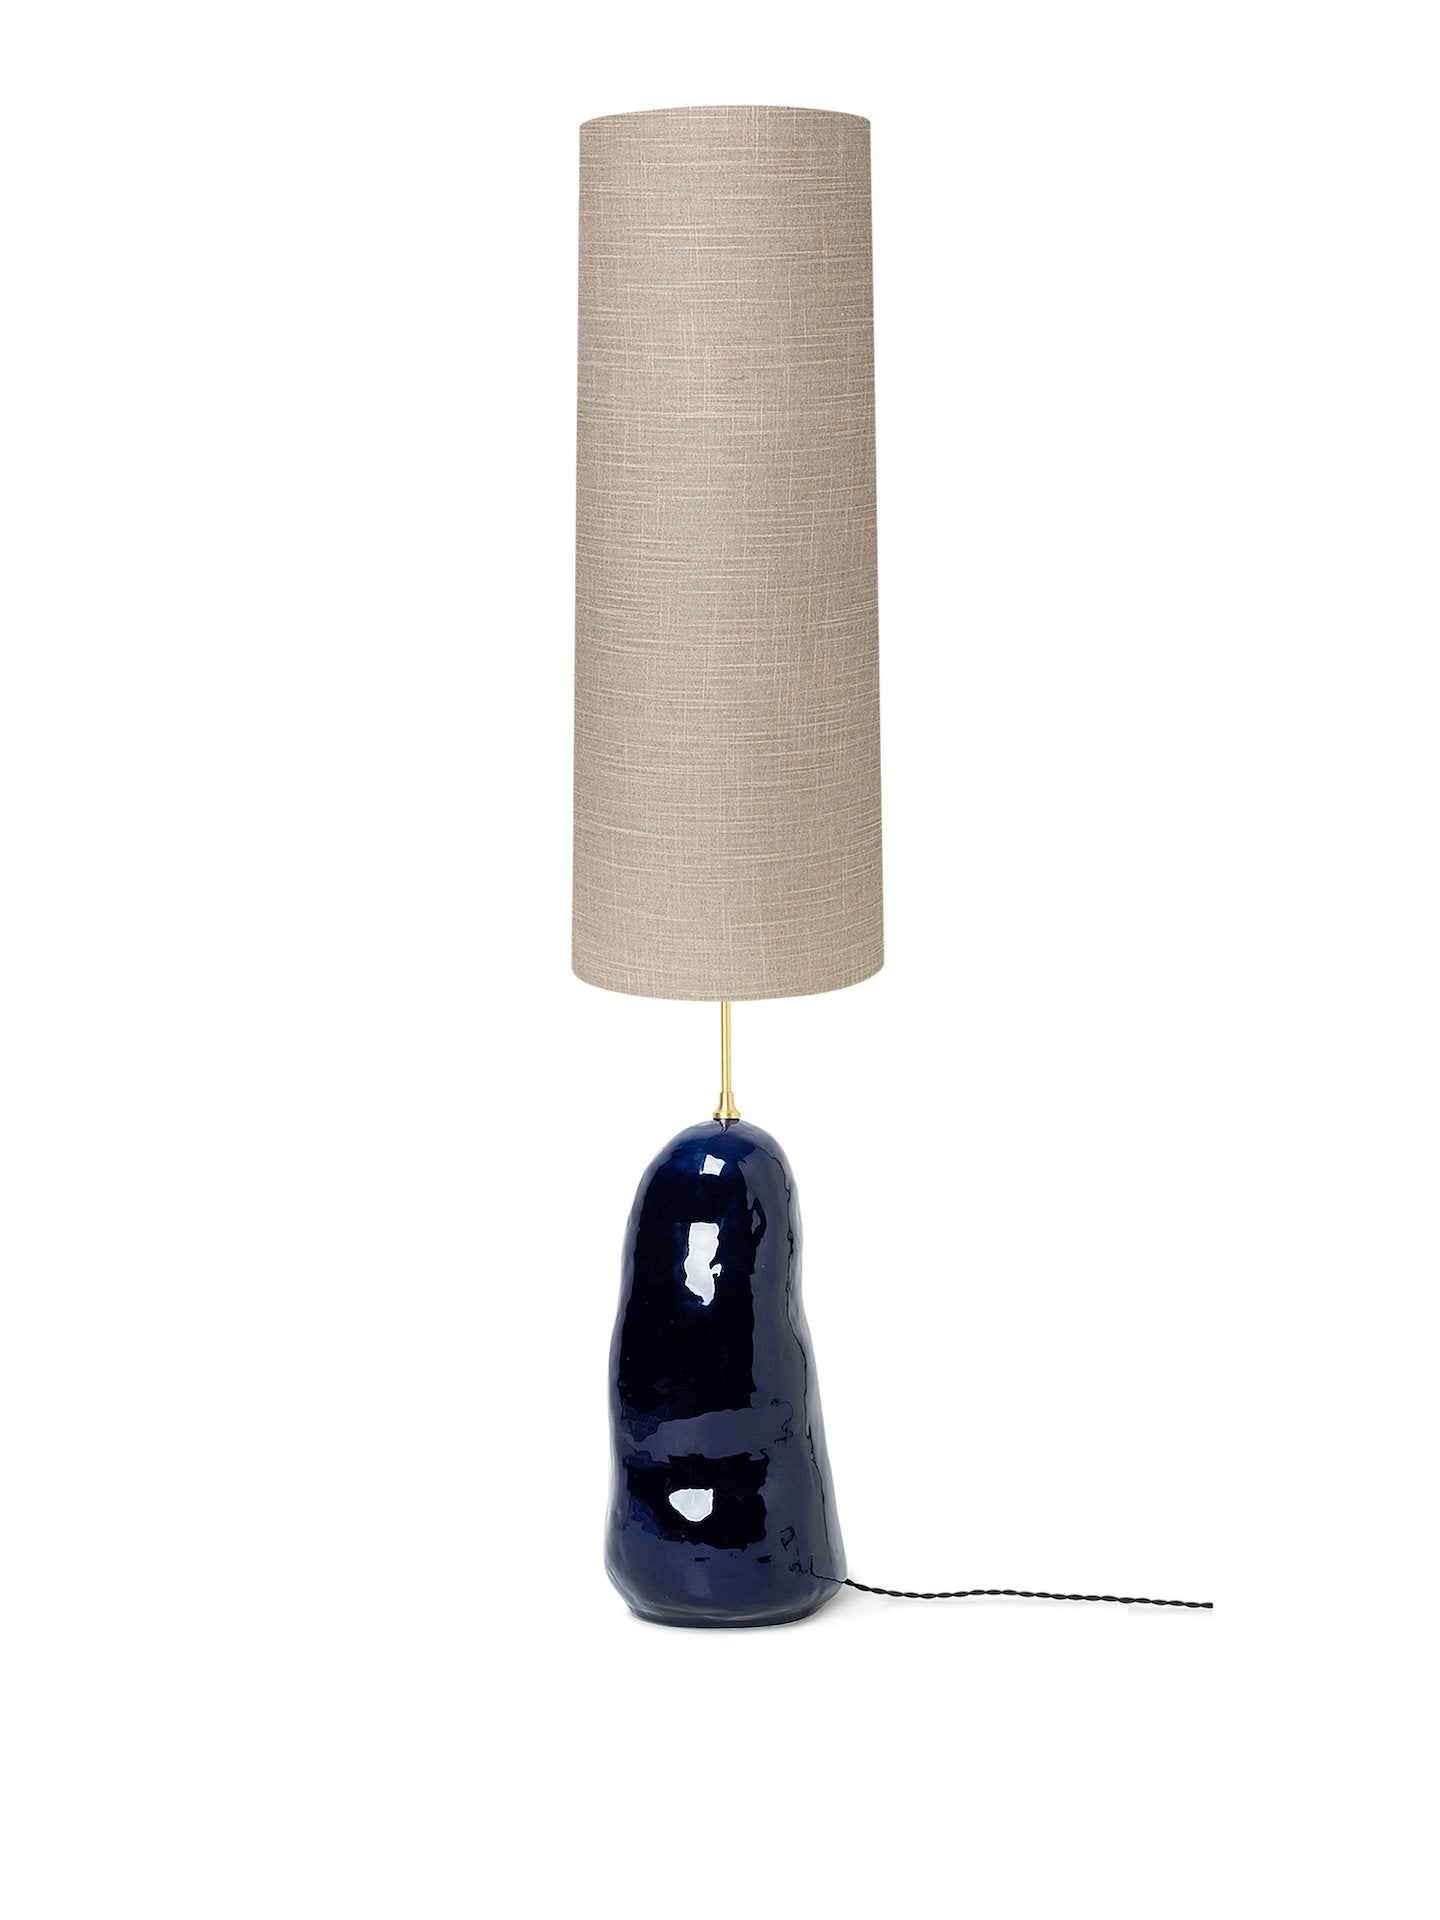 Eclipse Lamp Shade | Long | Sand Colourway by ferm LIVING - Lifestory - ferm LIVING